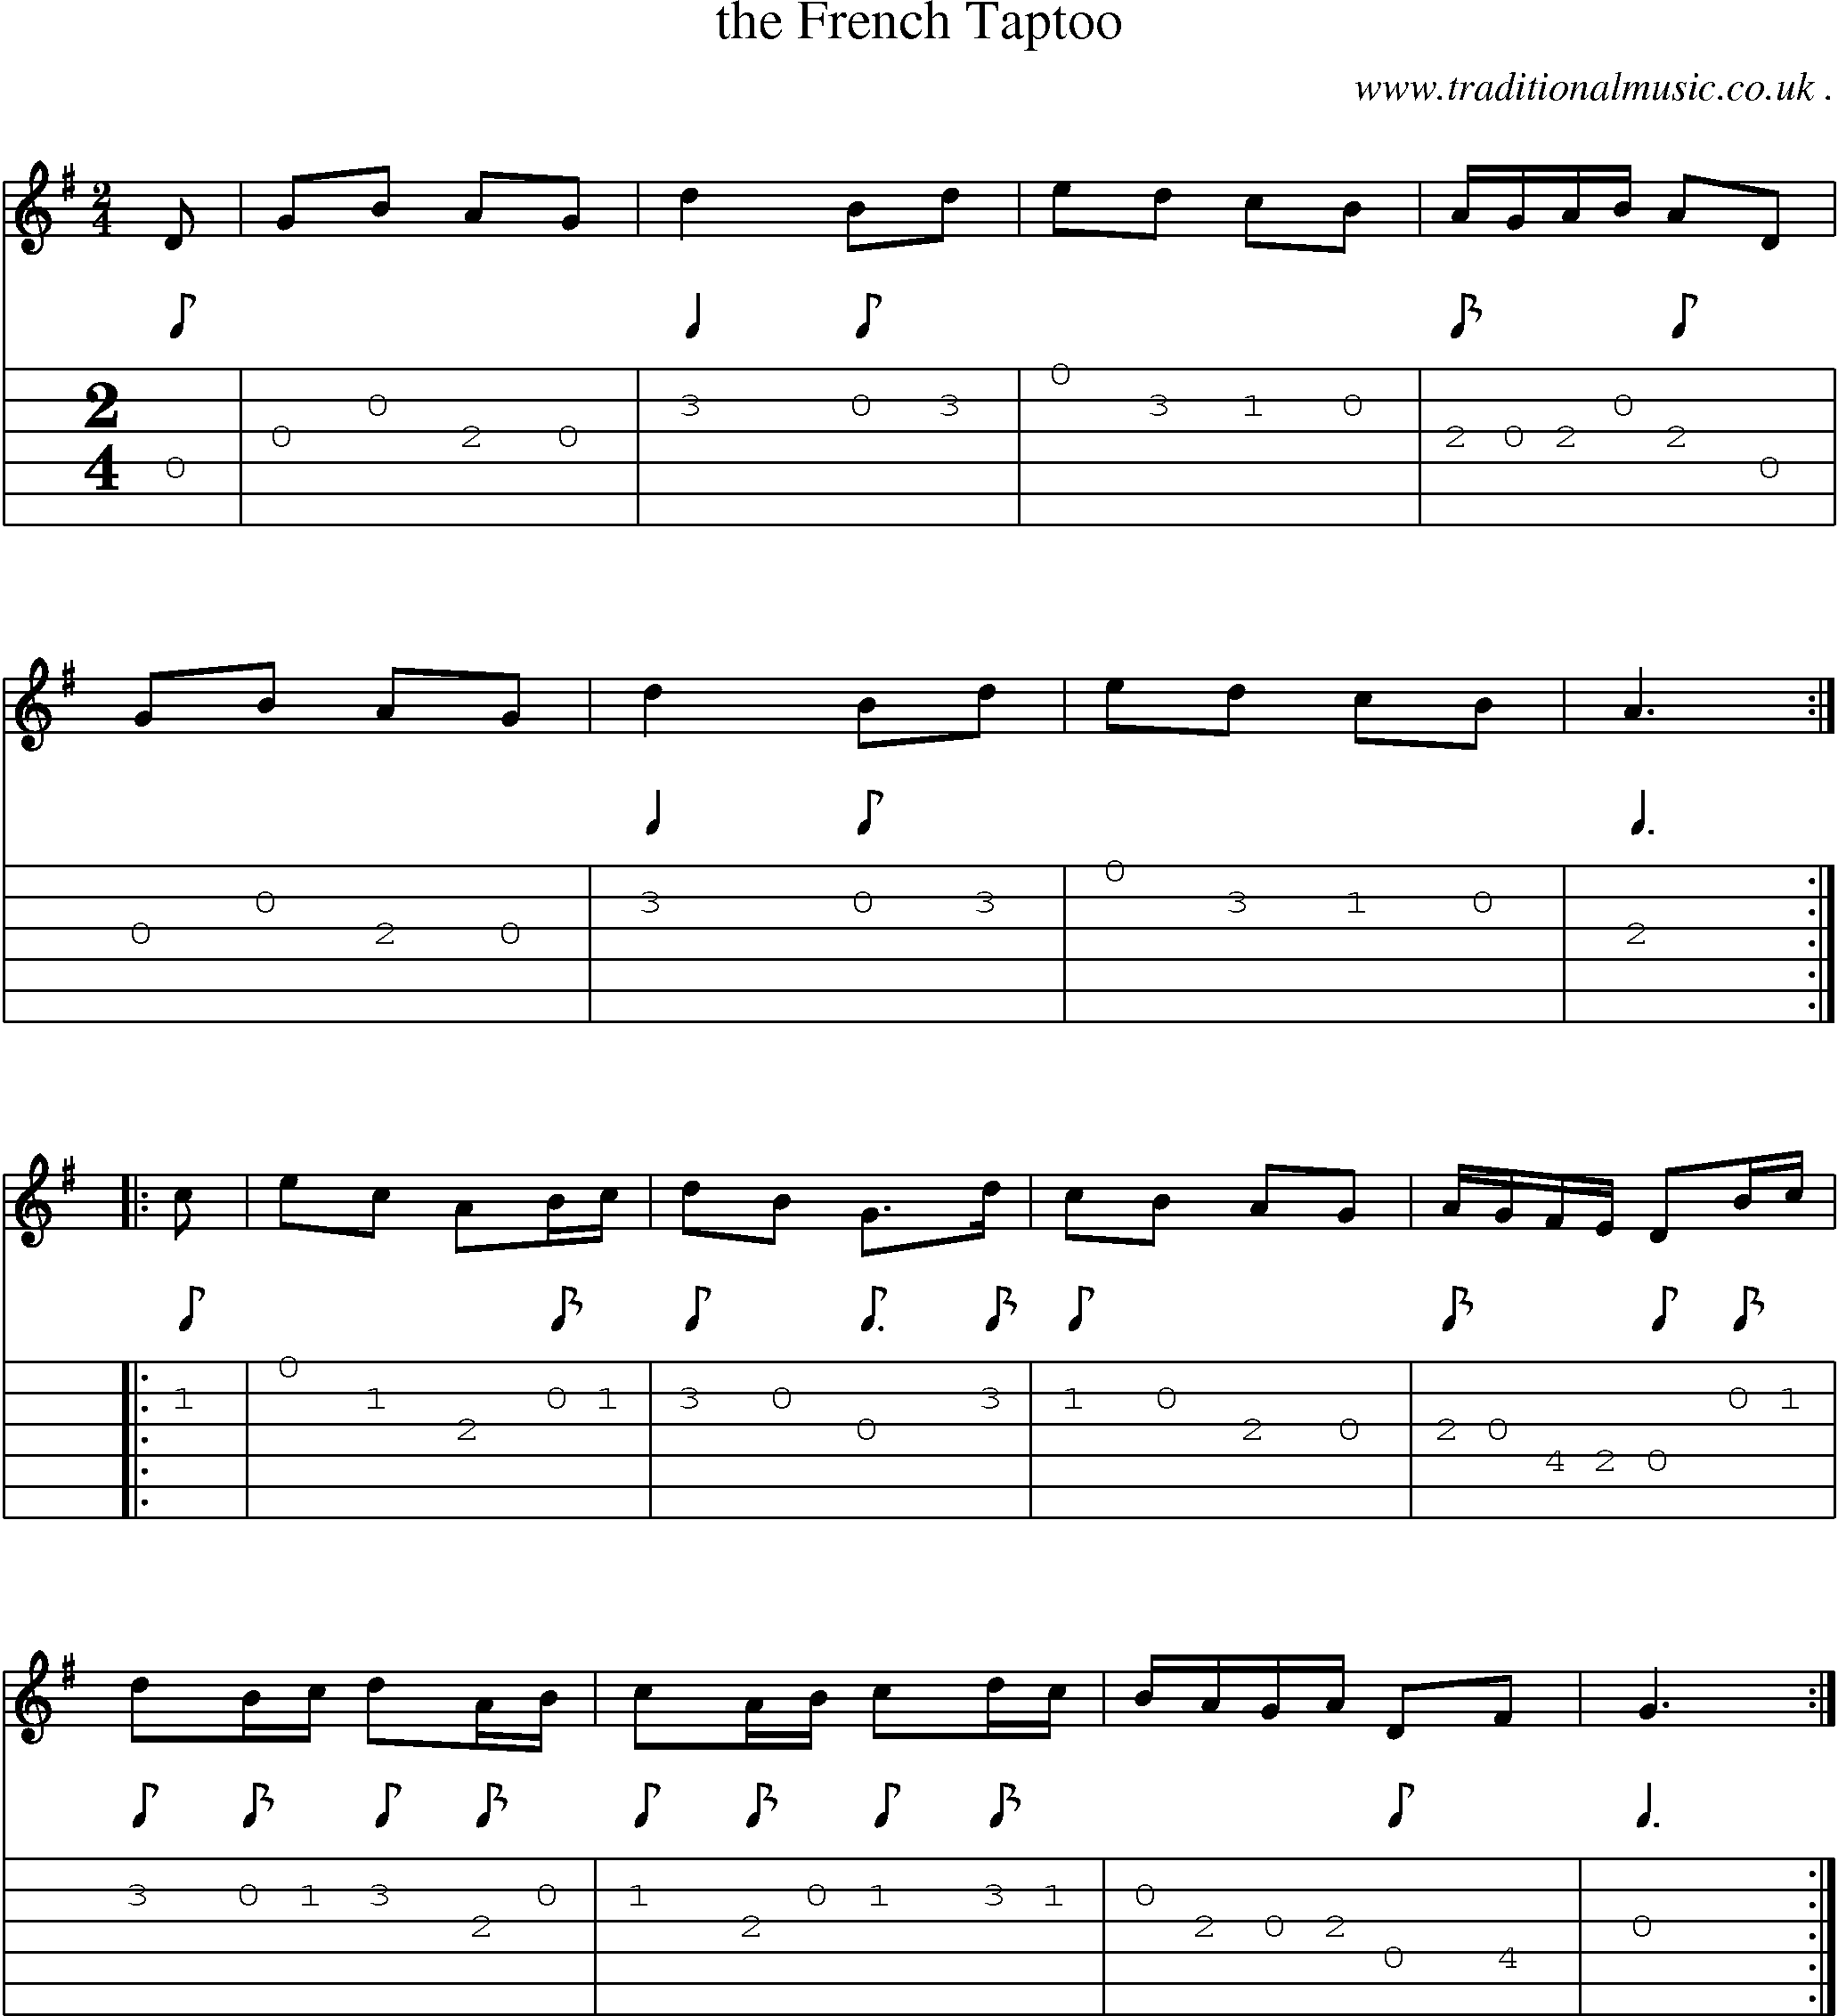 Sheet-Music and Guitar Tabs for The French Taptoo